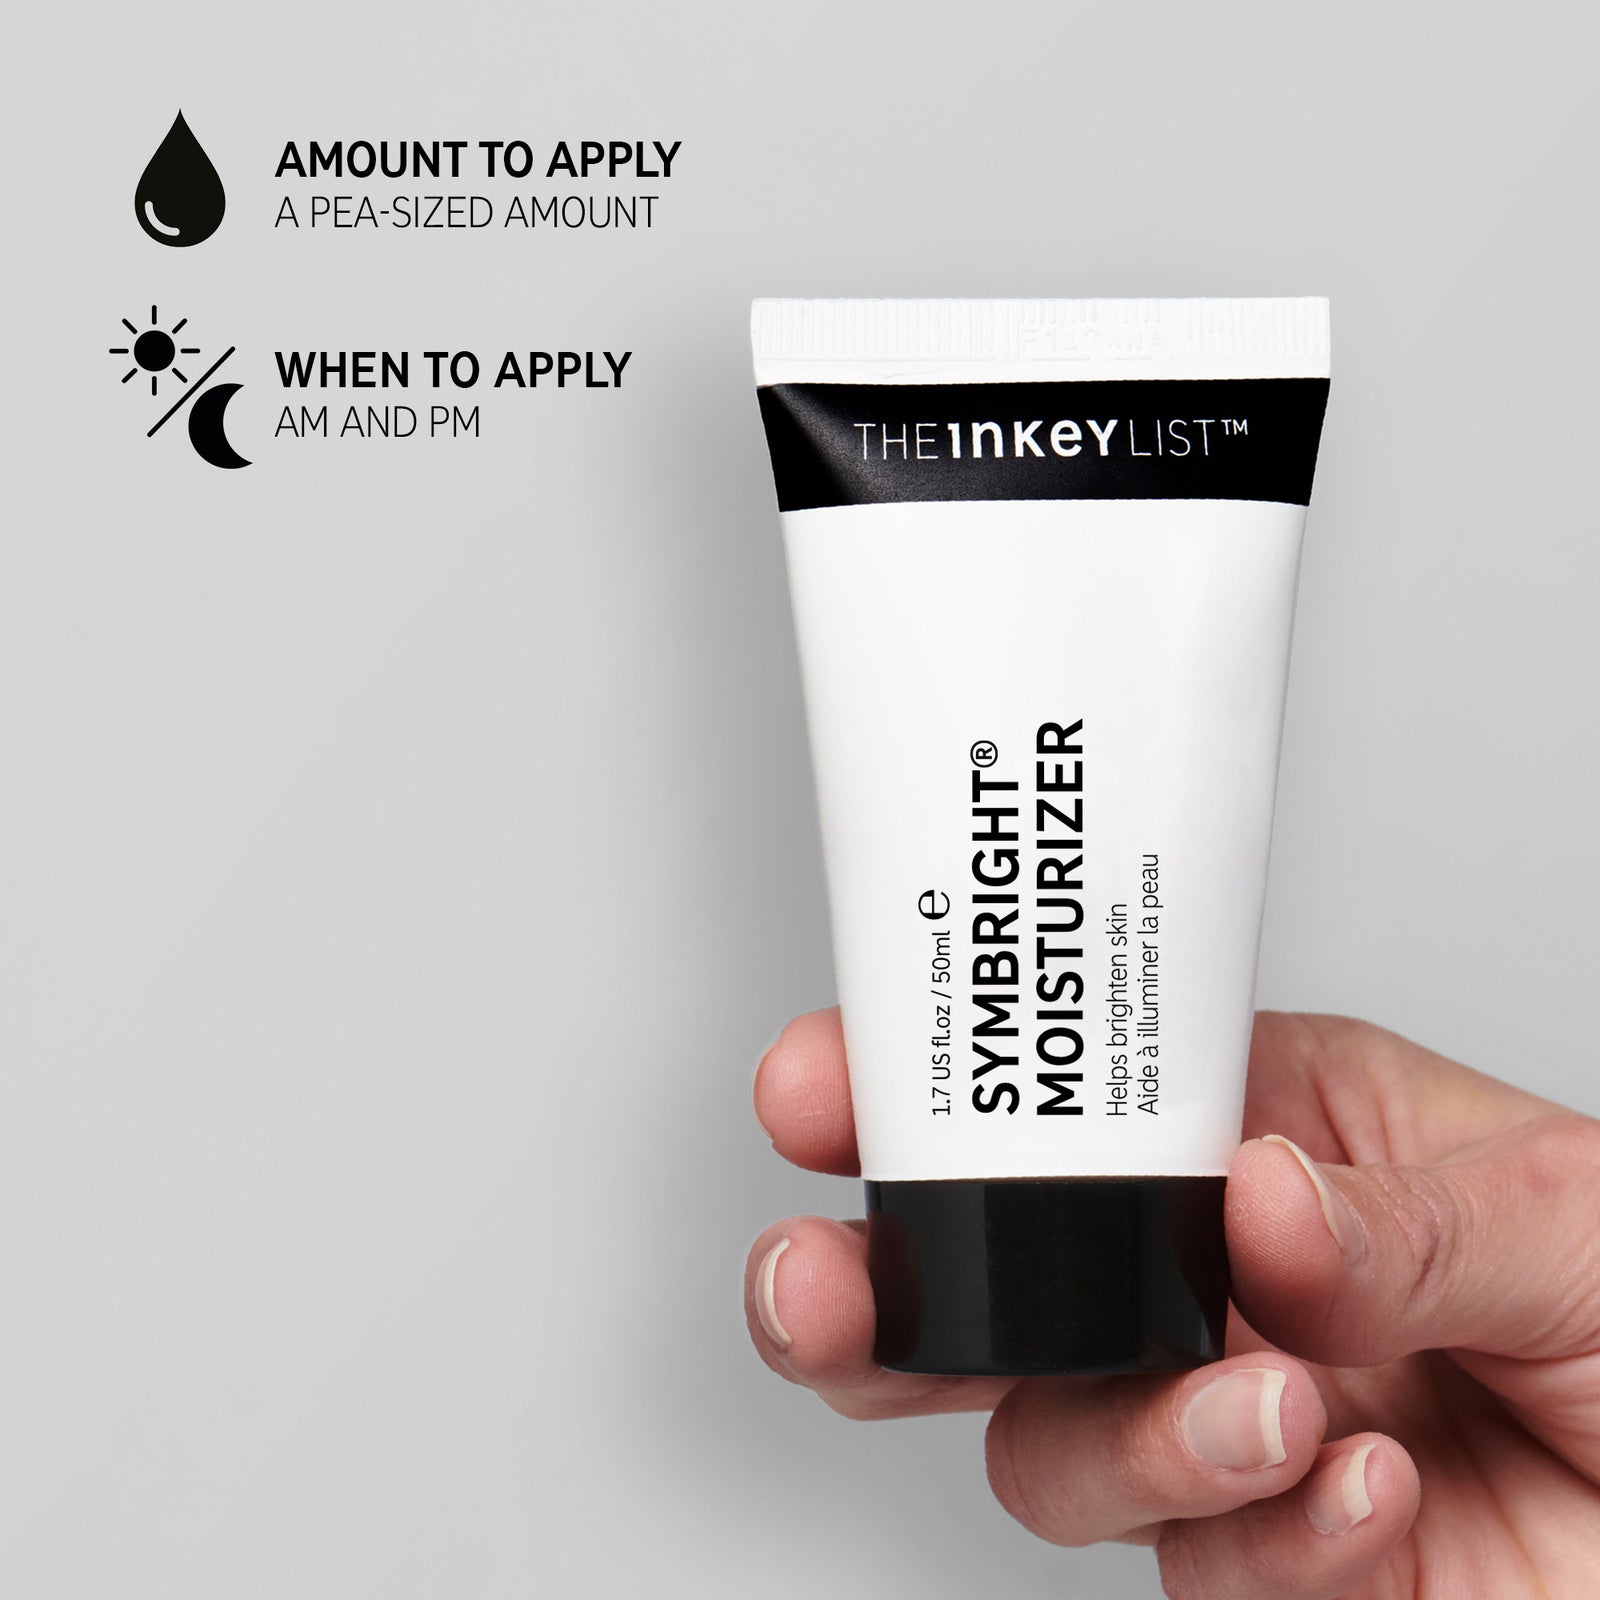 Hand holding Symbright Moisturizer on grey background with black text explaining amount to apply (pea-sized amount) and when to use it (AM and PM)